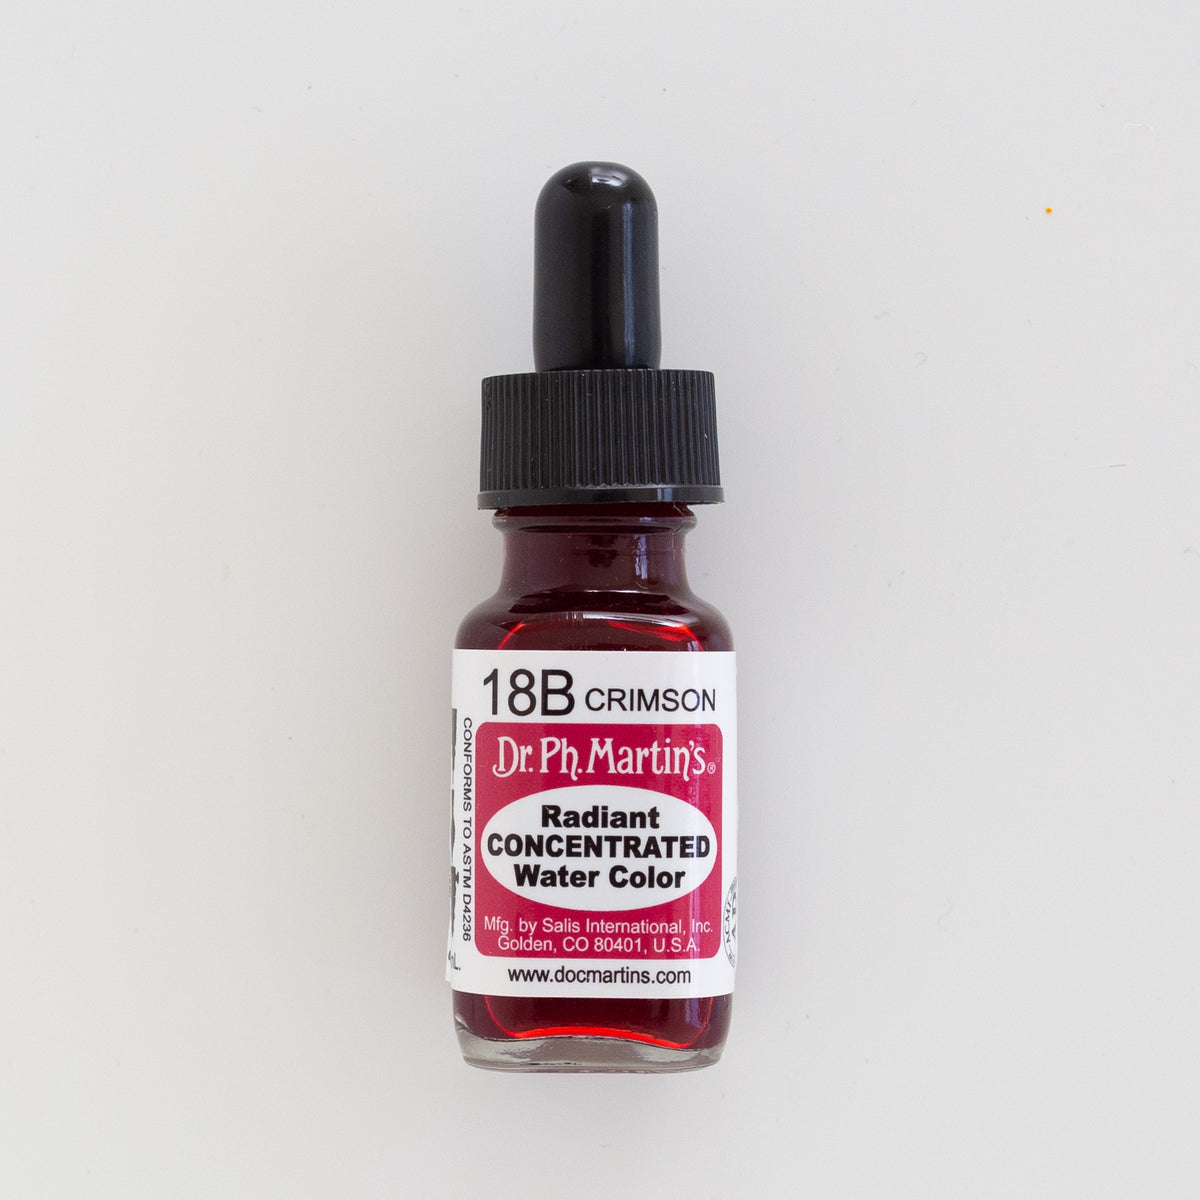 DR. Ph. Martin's Radiant Concentrated 18B Crimson